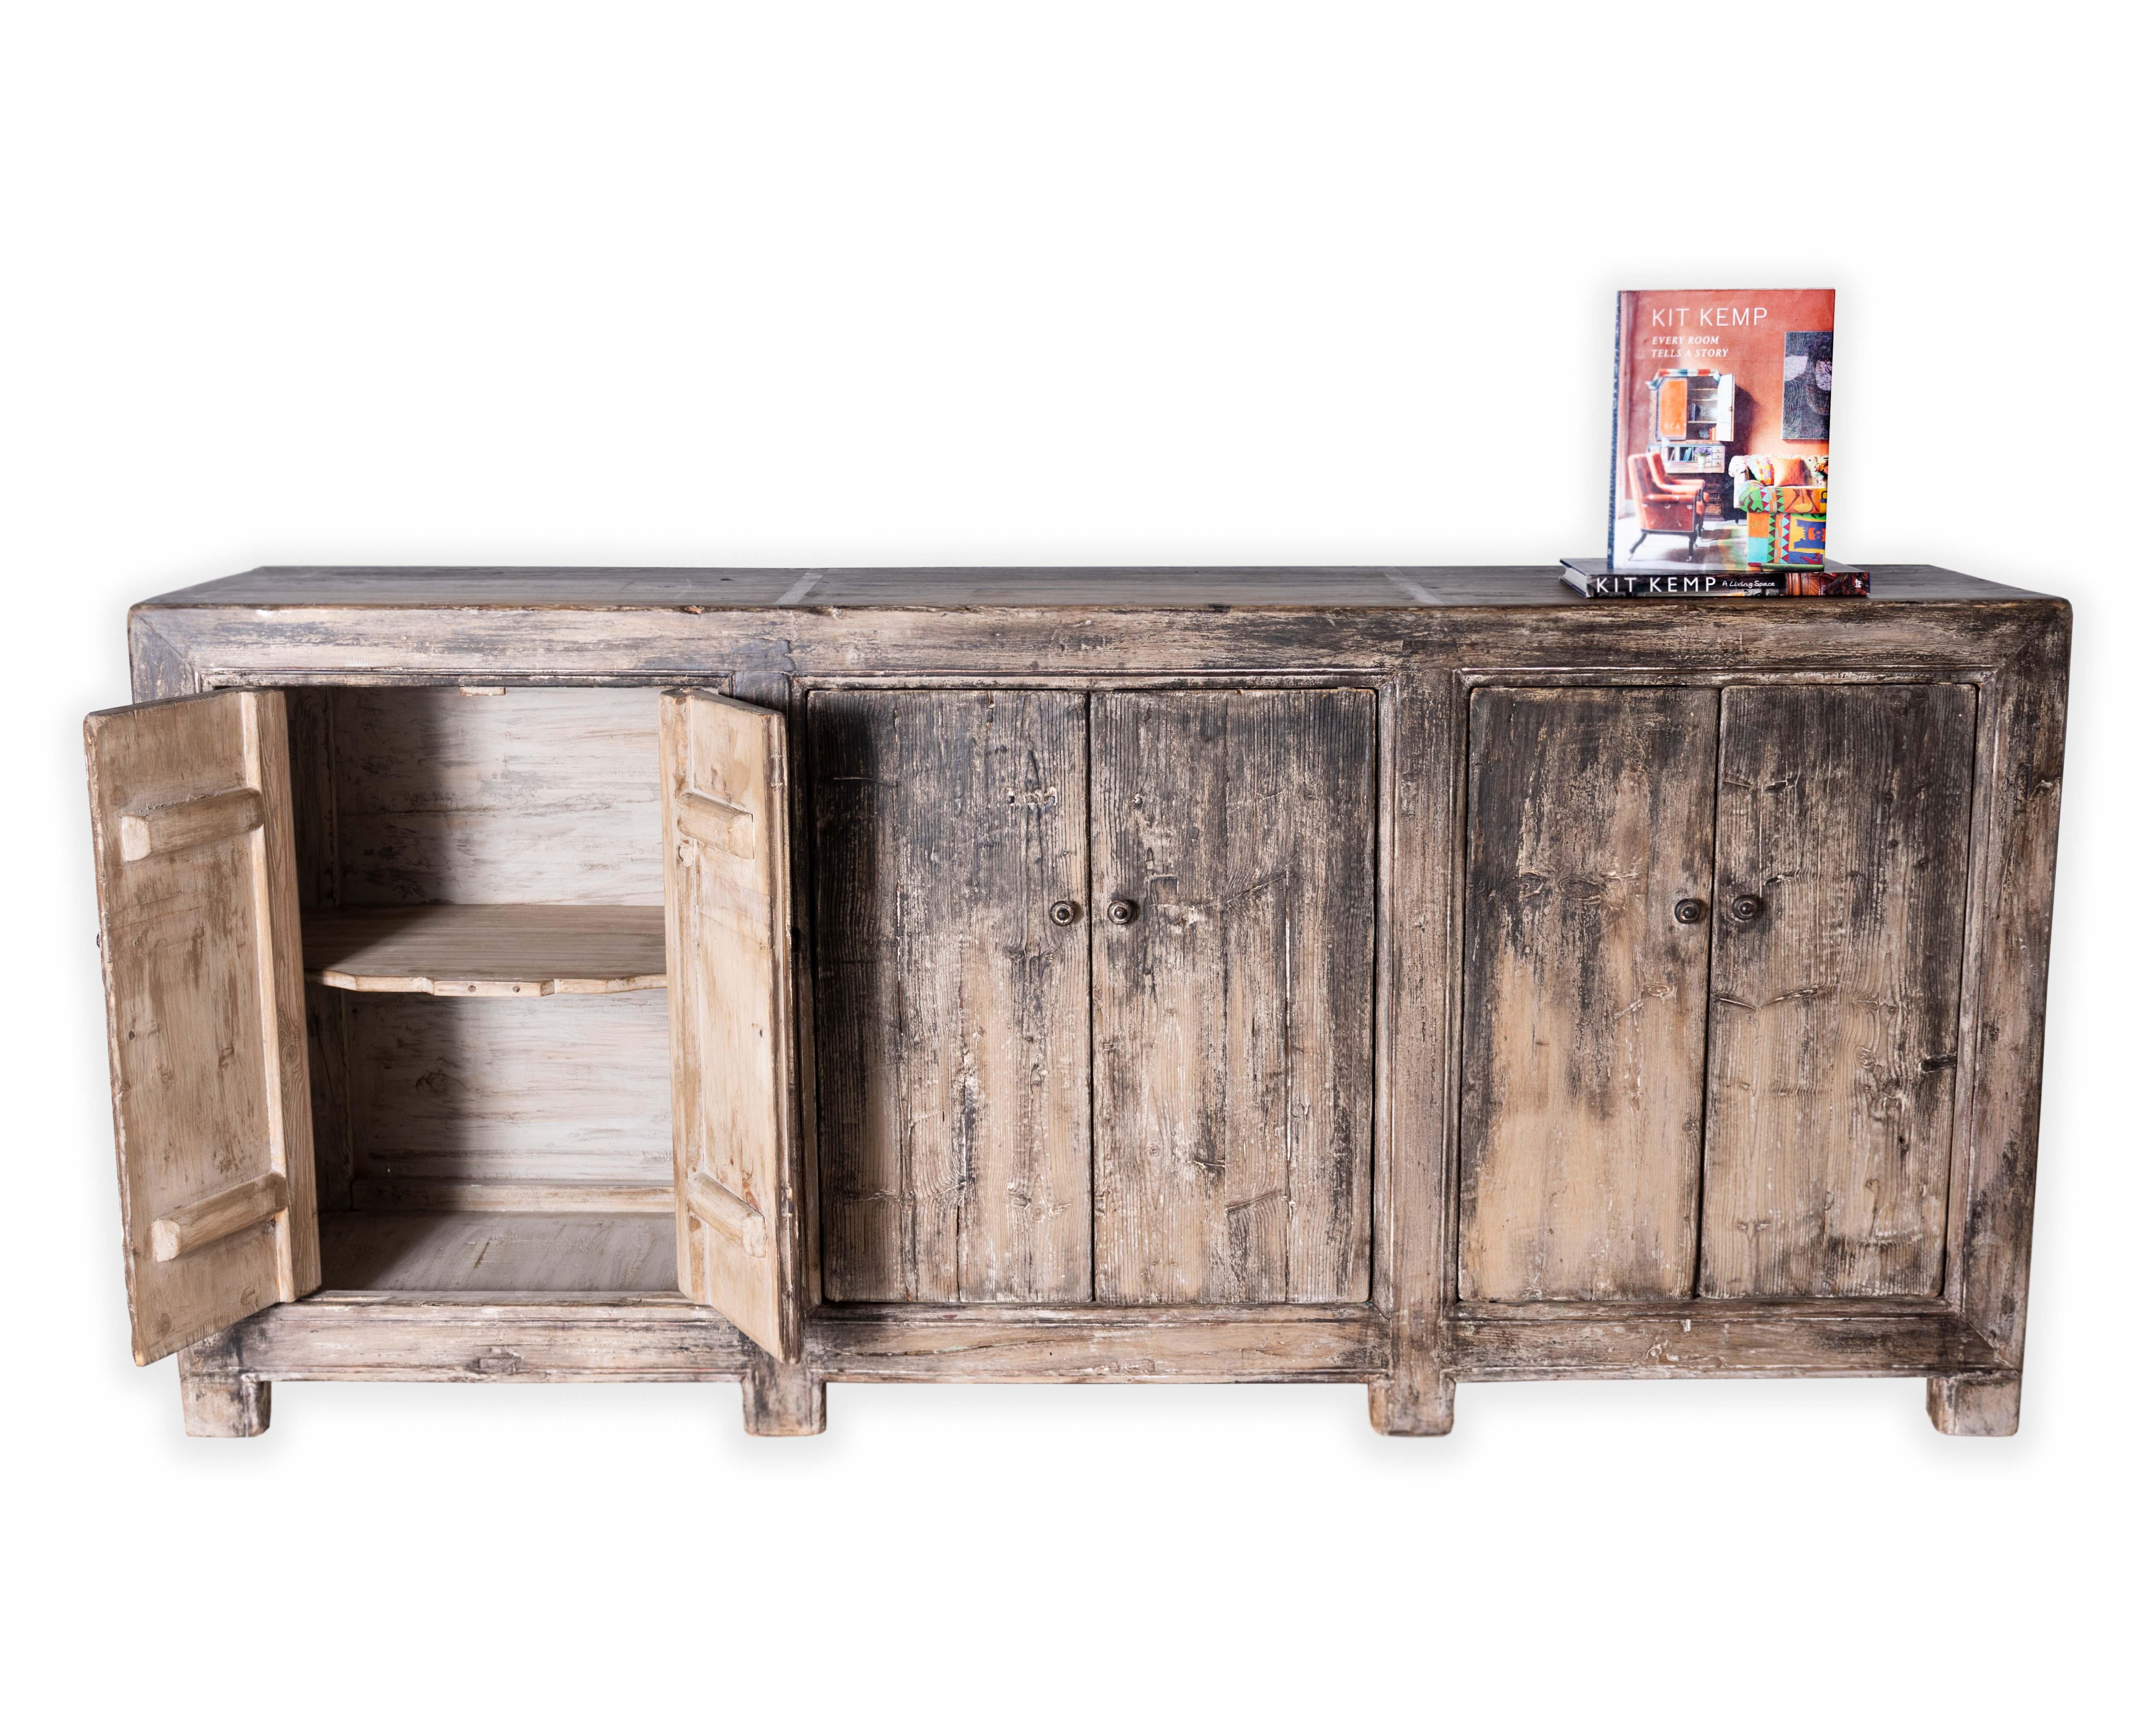 Unfinished wooden six door sideboard with weathered knobs.

This piece is a part of Brendan Bass’s one-of-a-kind collection, Le Monde. French for “The World”, the Le Monde collection is made up of rare and hard to find pieces curated by Brendan from